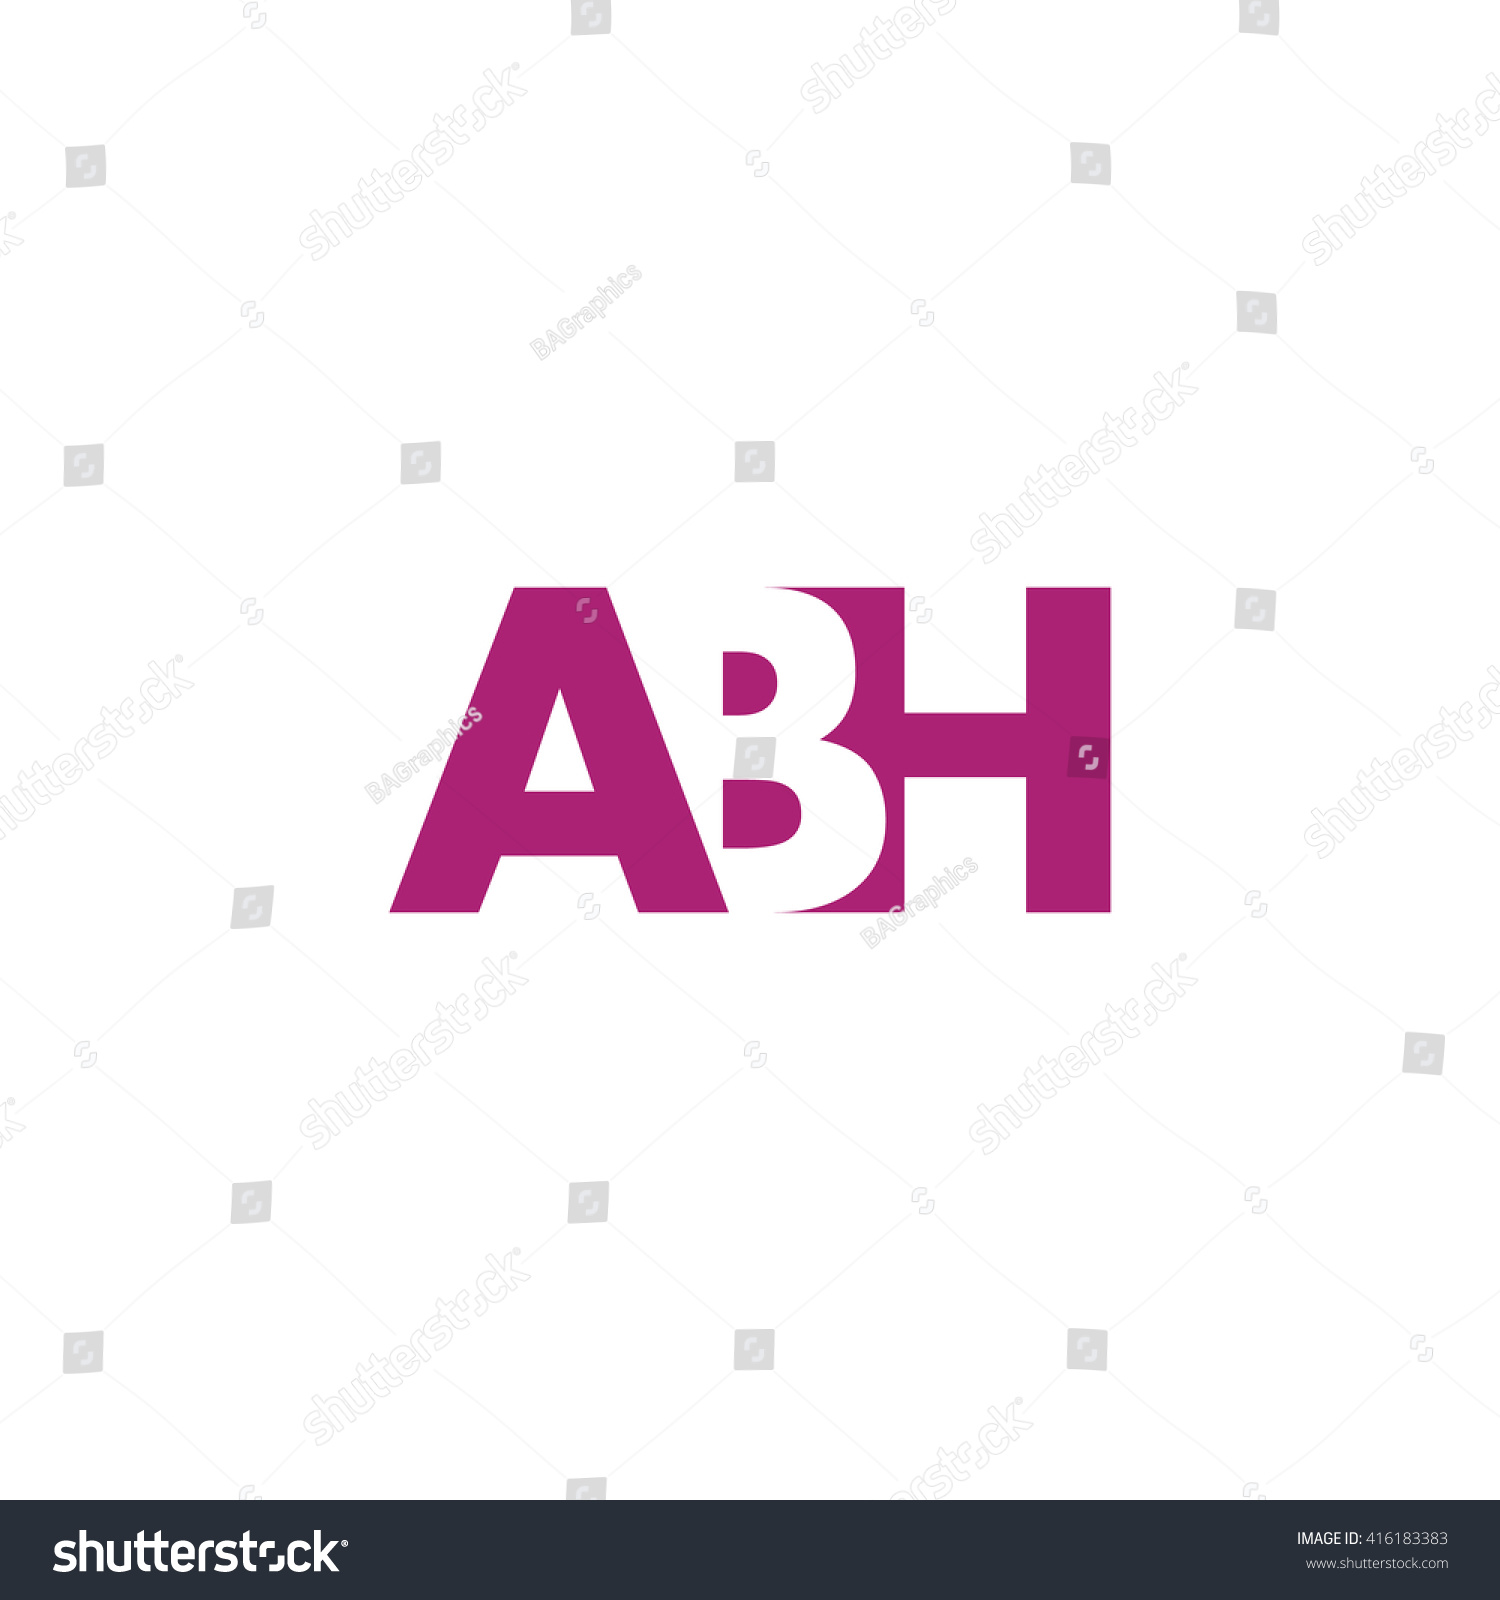 Abh Vector PNG - 97086